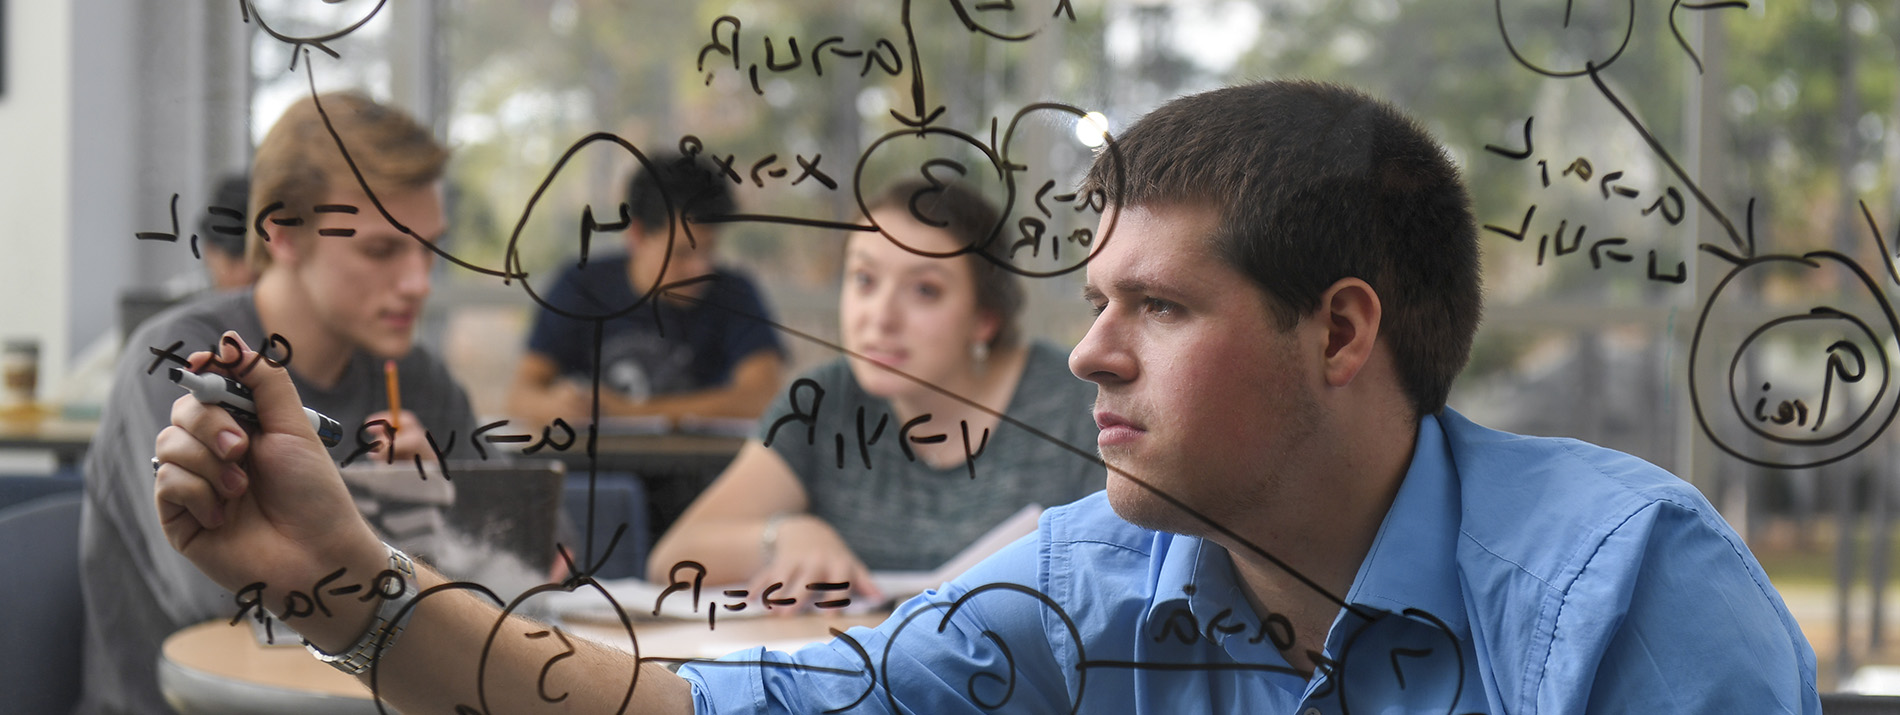 student writing on glass board with marker while other students look on from the background